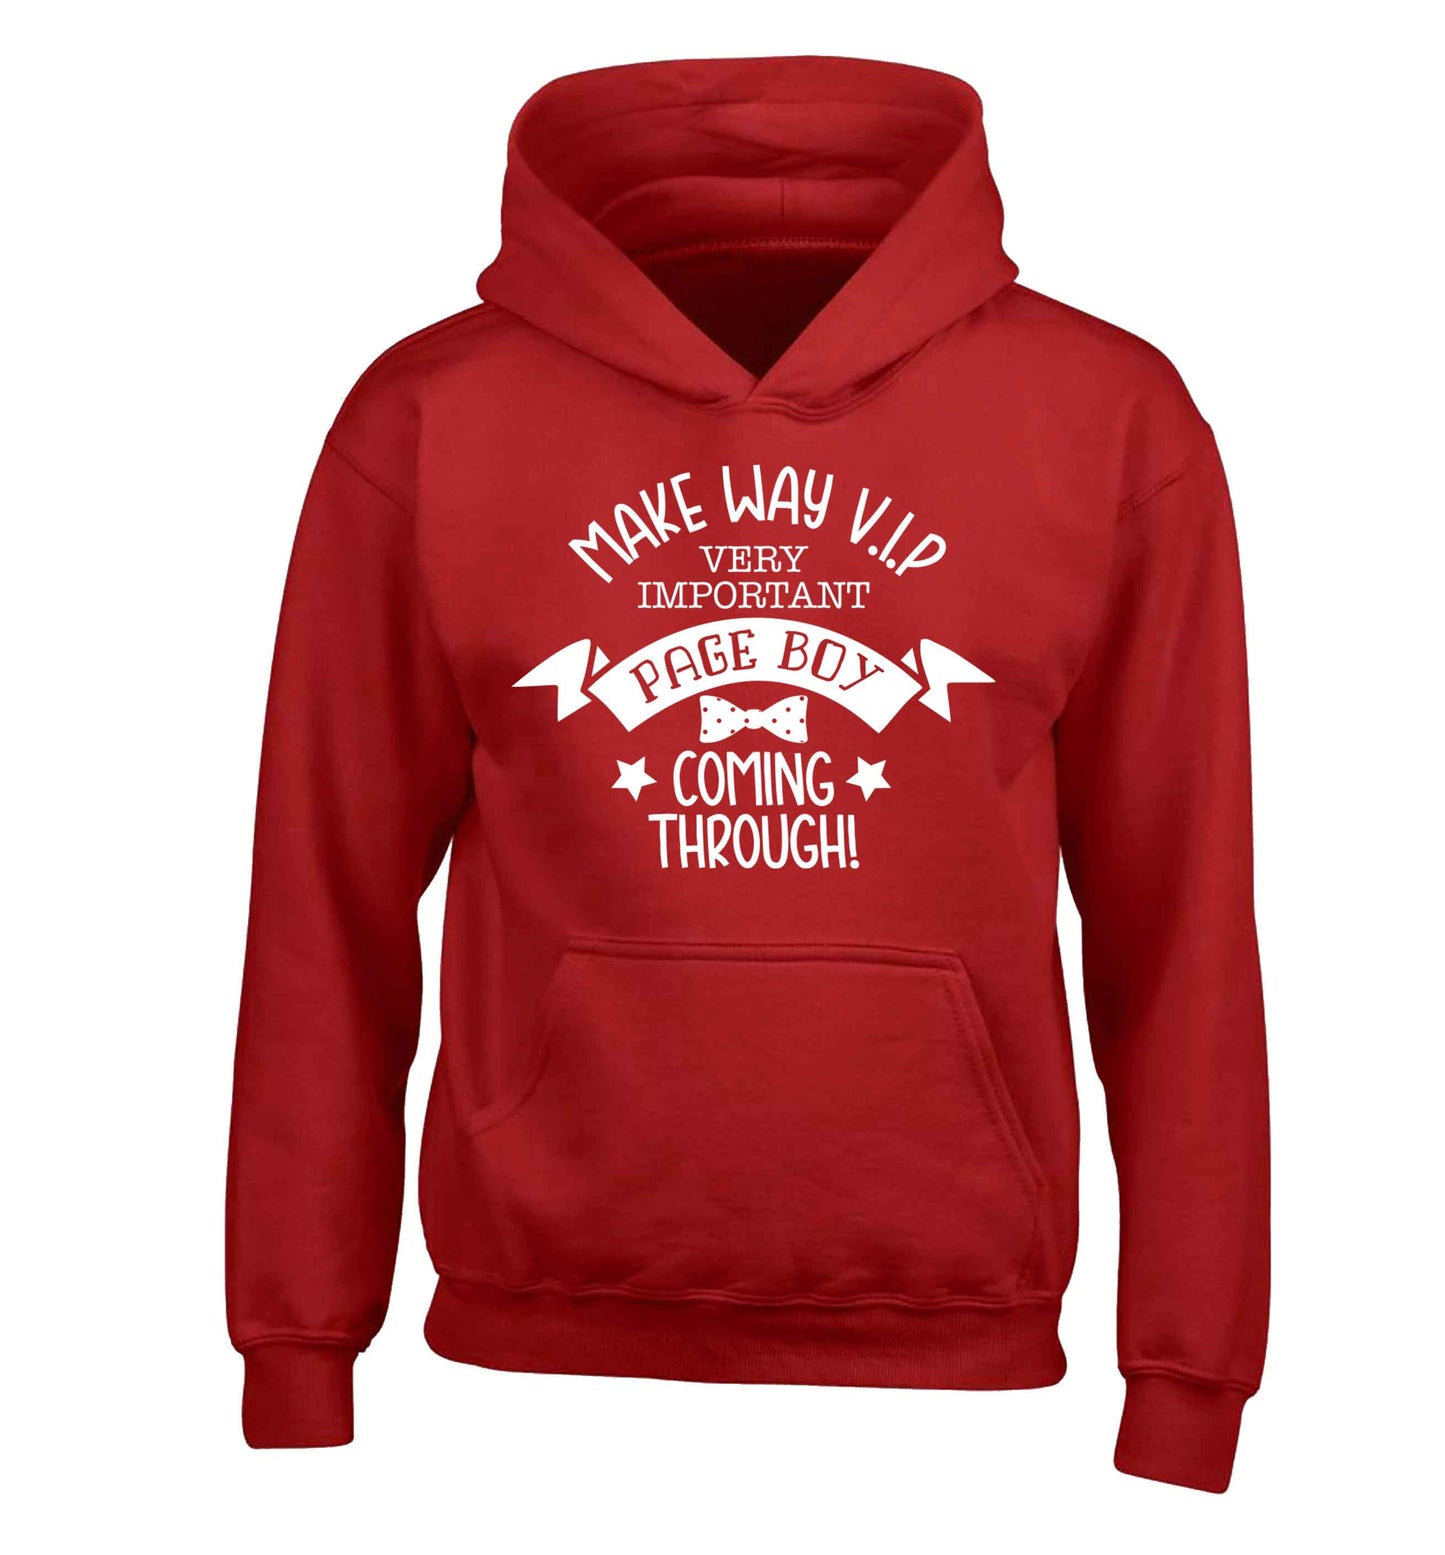 Make way V.I.P page boy coming through! children's red hoodie 12-13 Years